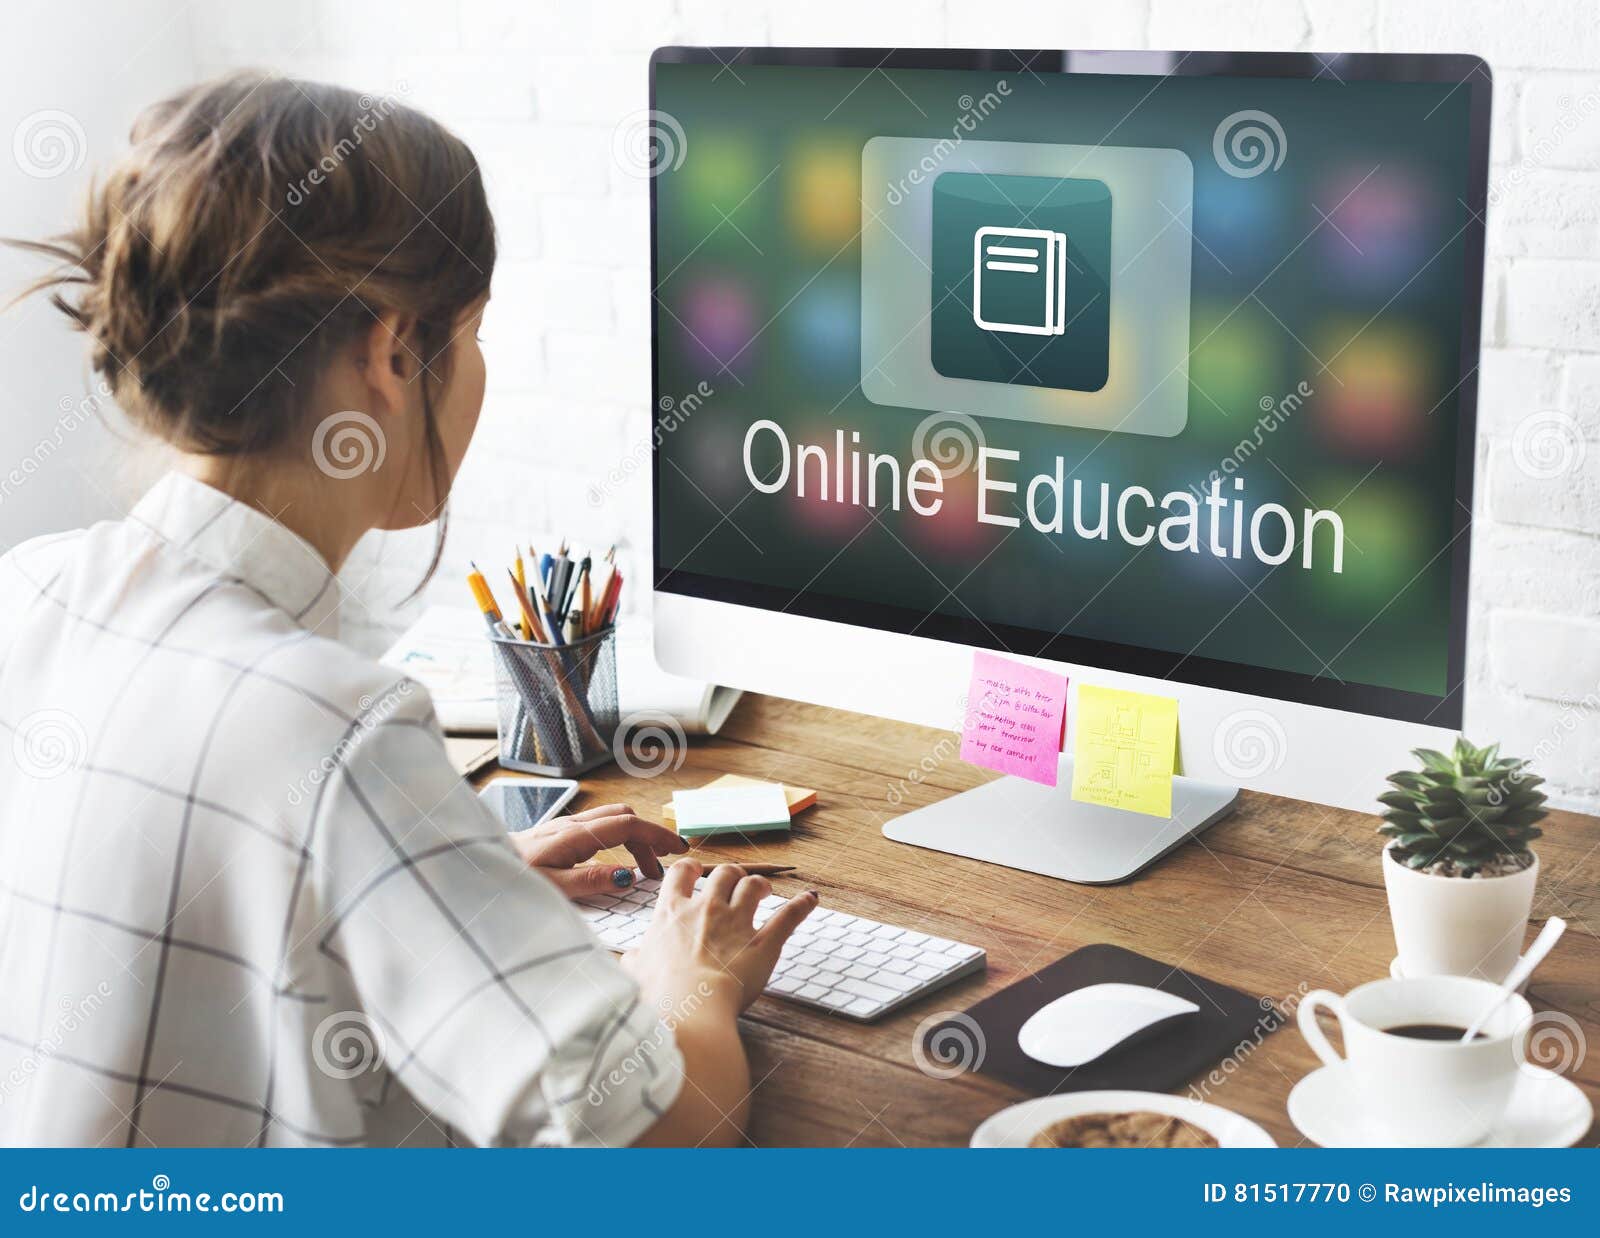 academic e-learning education online application concept